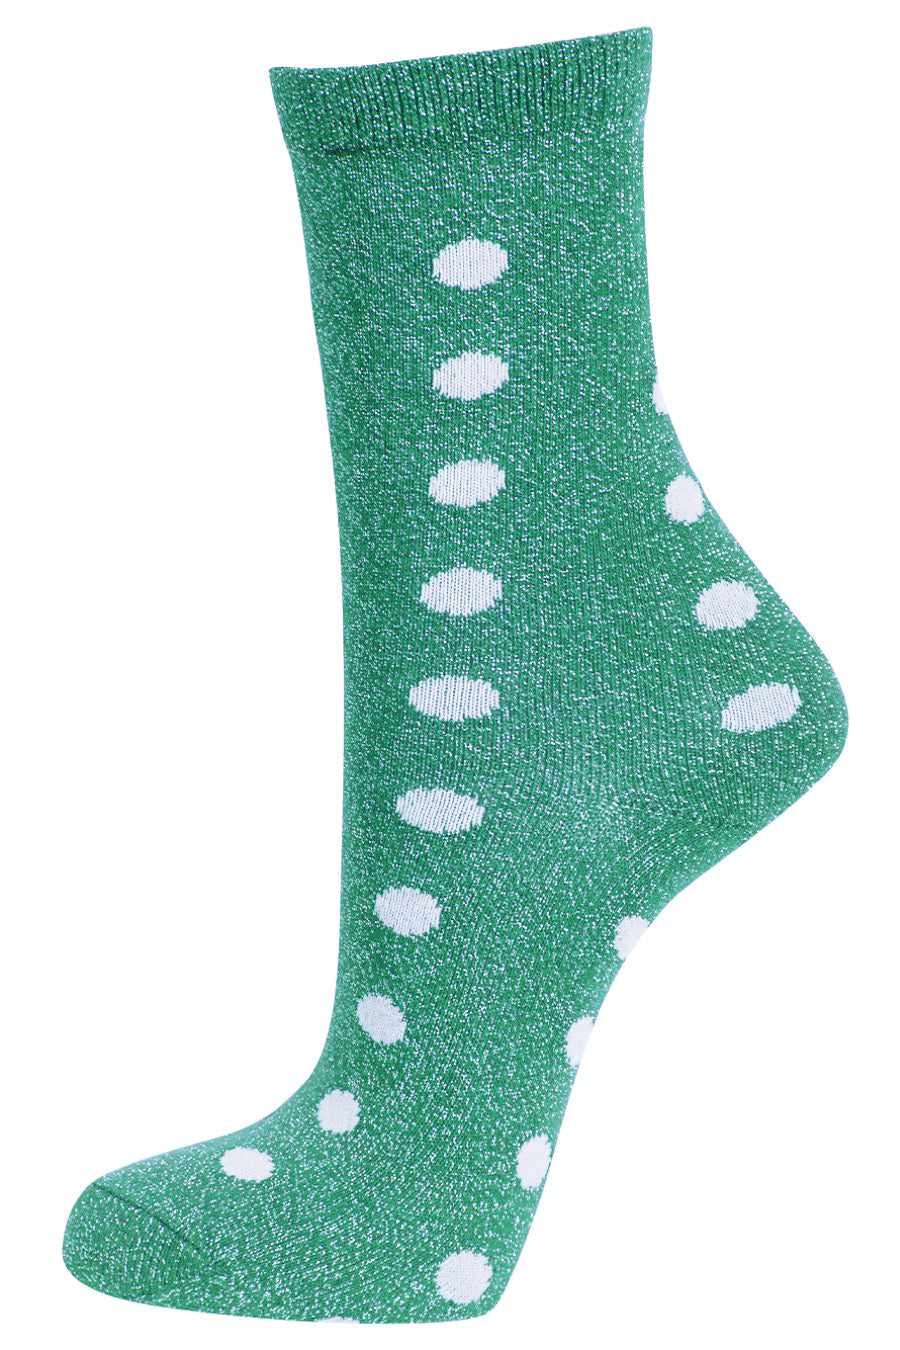 green and white polka dot ankle socks with an all over silver glitter effect